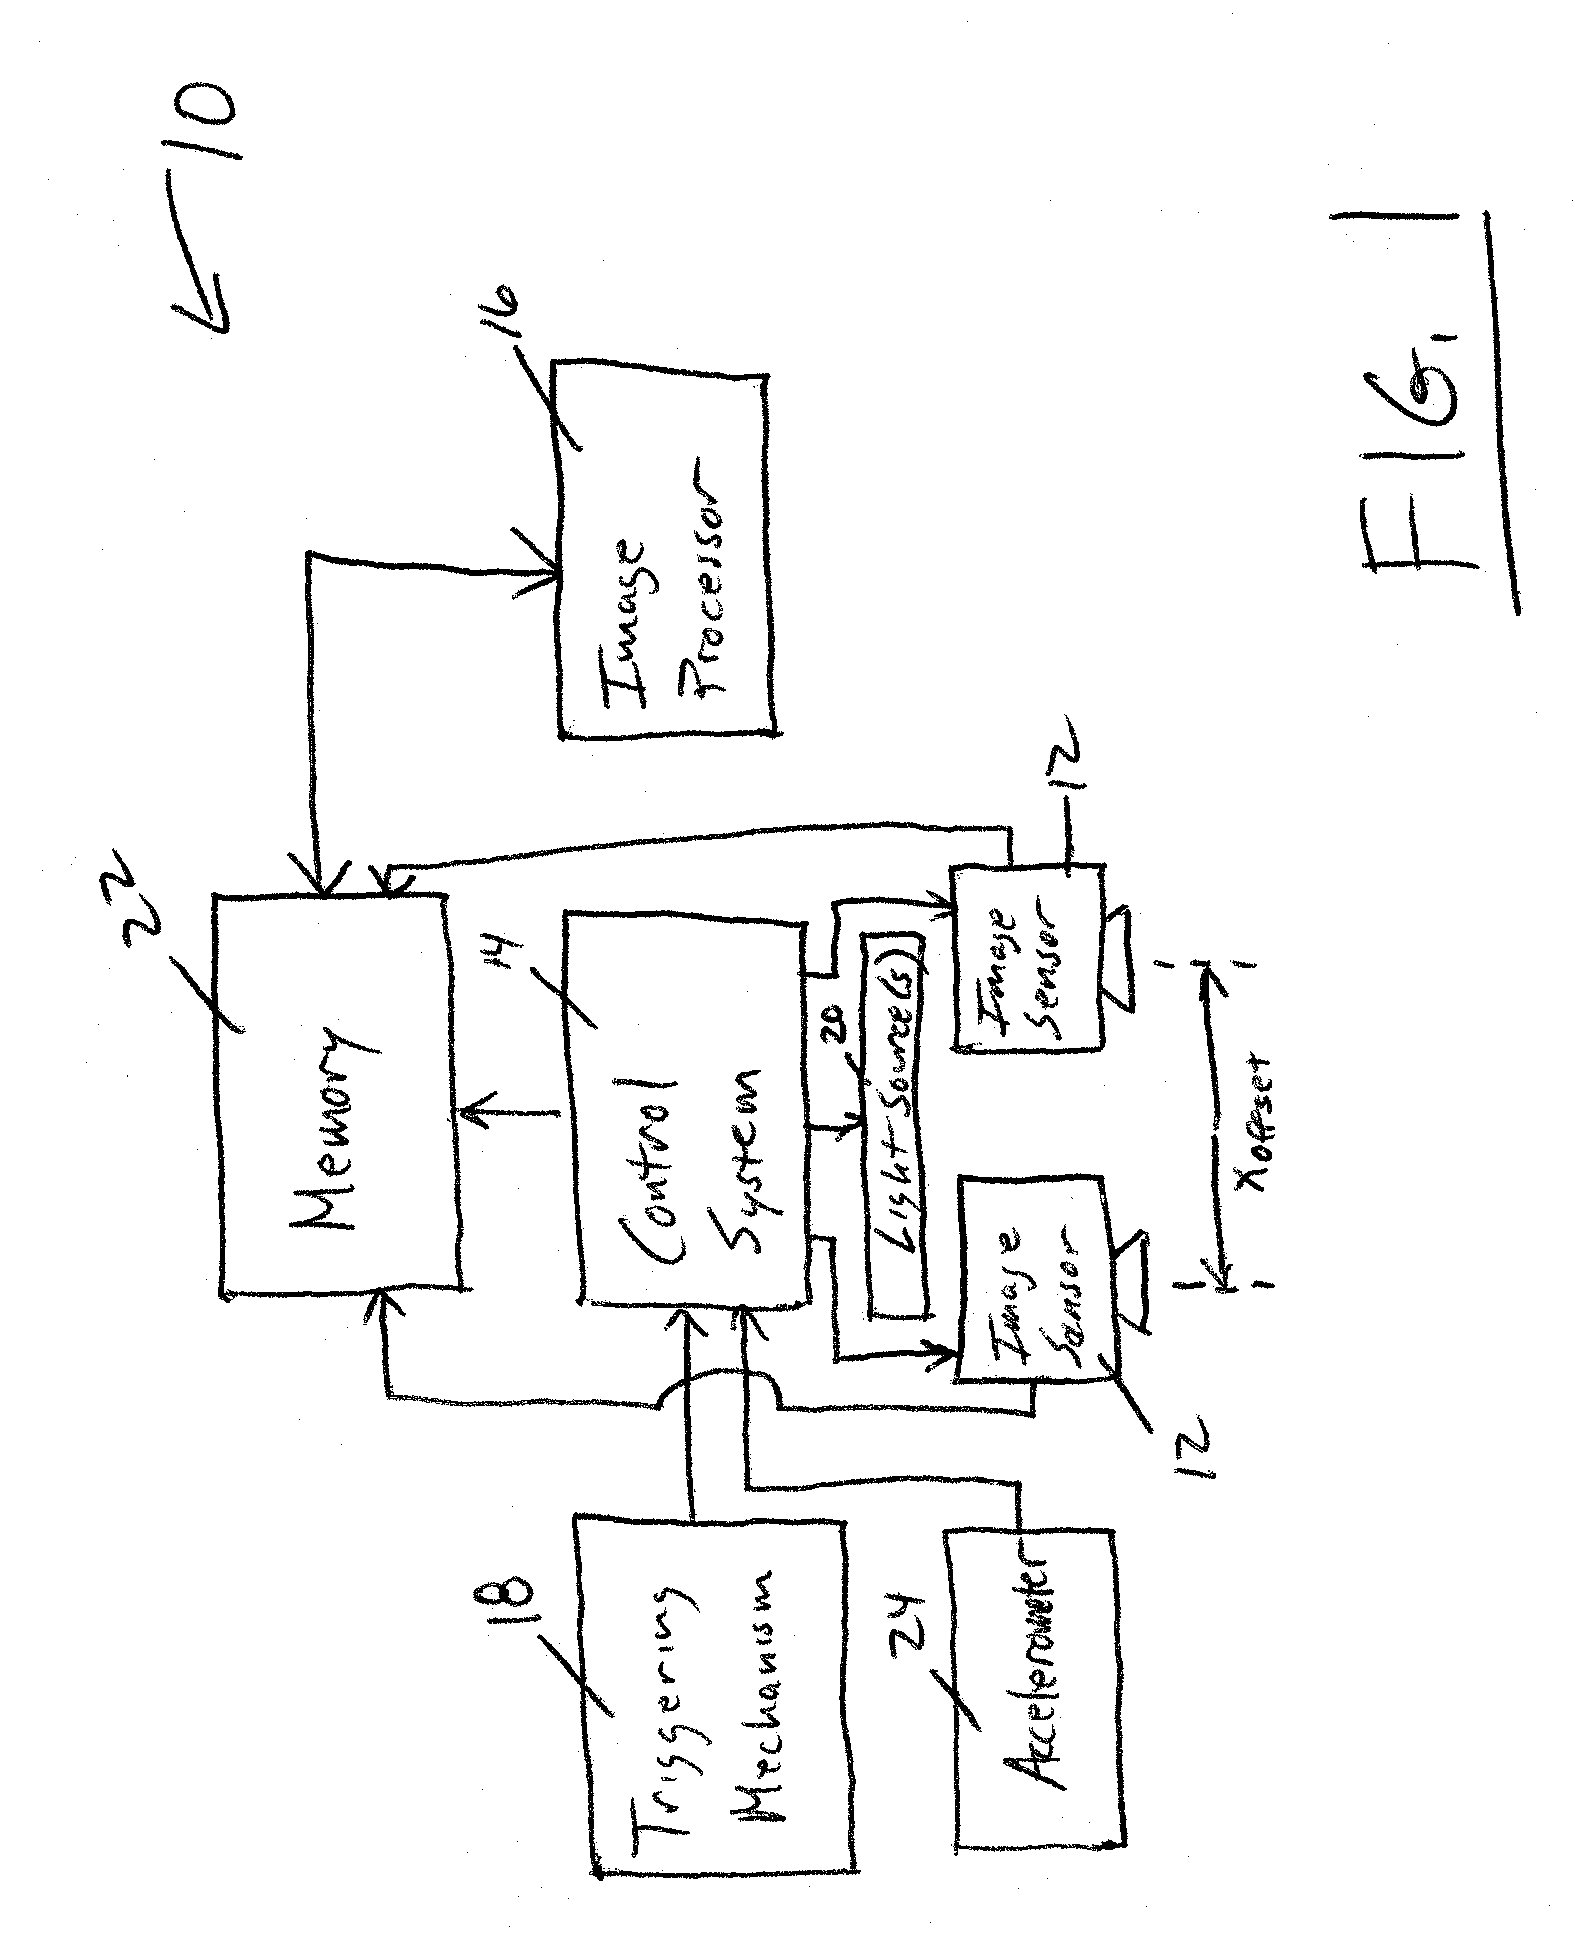 Imaging system and method including multiple, sequentially exposed image sensors